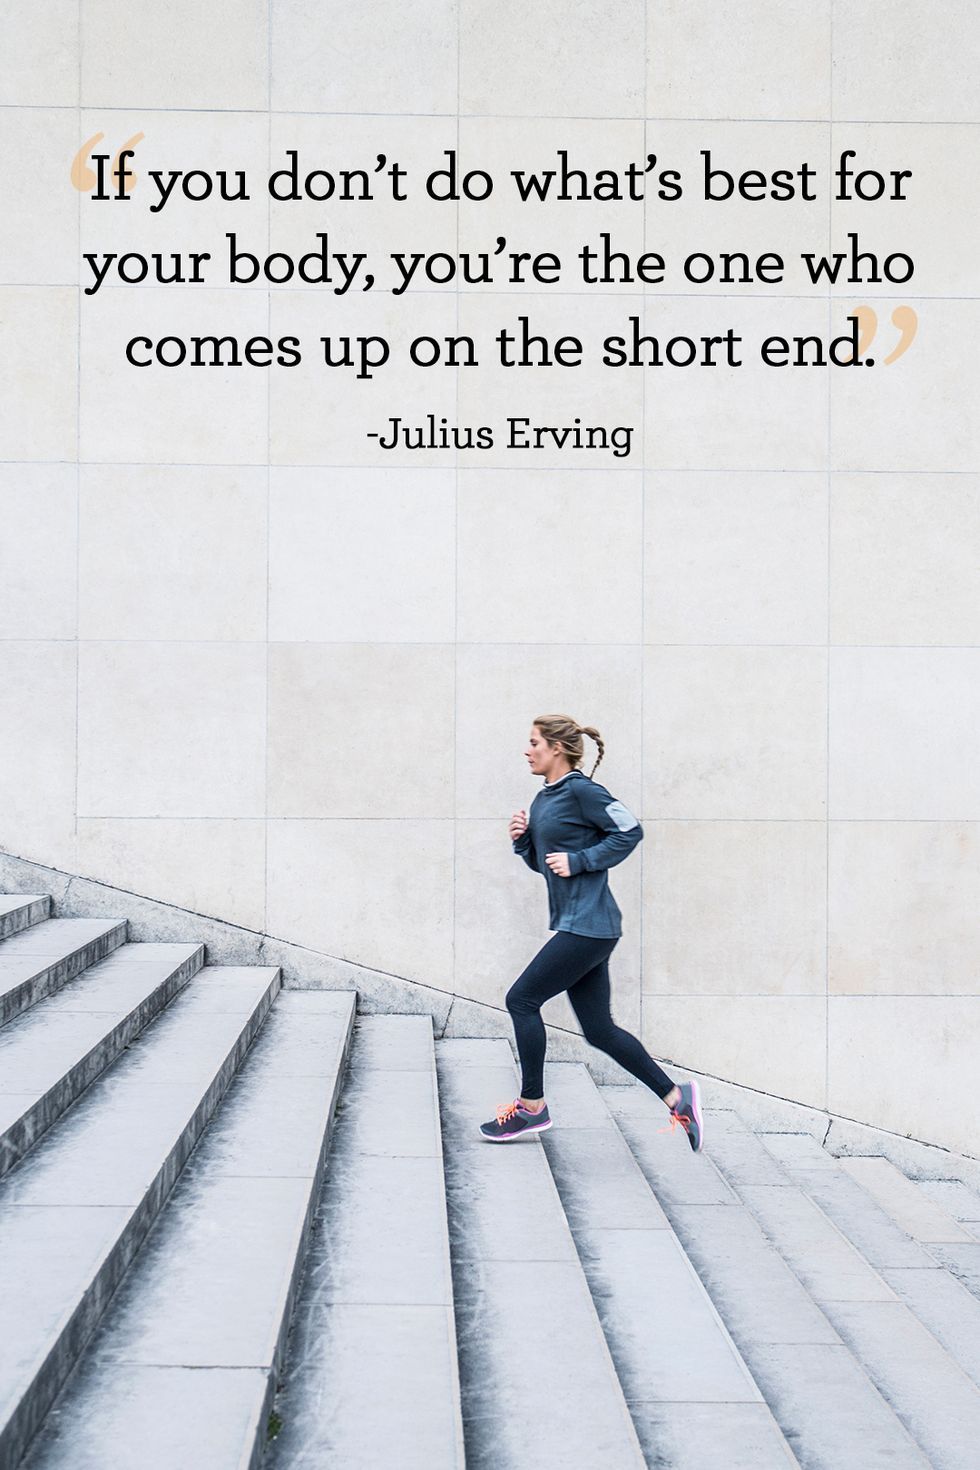 30 Best Motivational Quotes for Fitness - Lose Weight By Eating